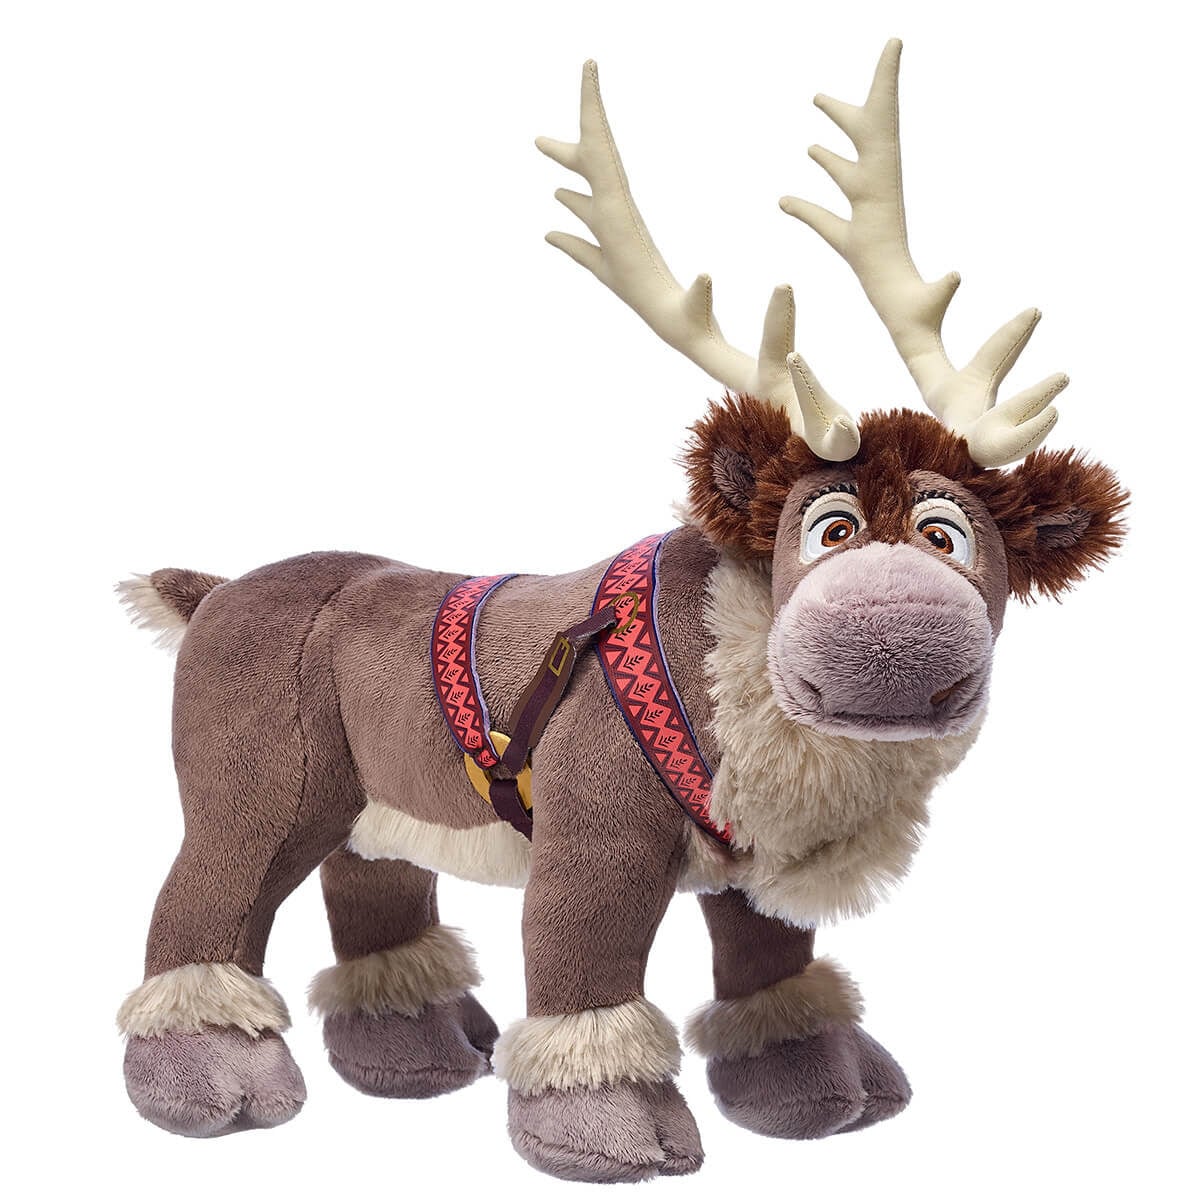 Disney Frozen Baby/Little Sven Plush 11" New with Tags goes with Kristoff doll 